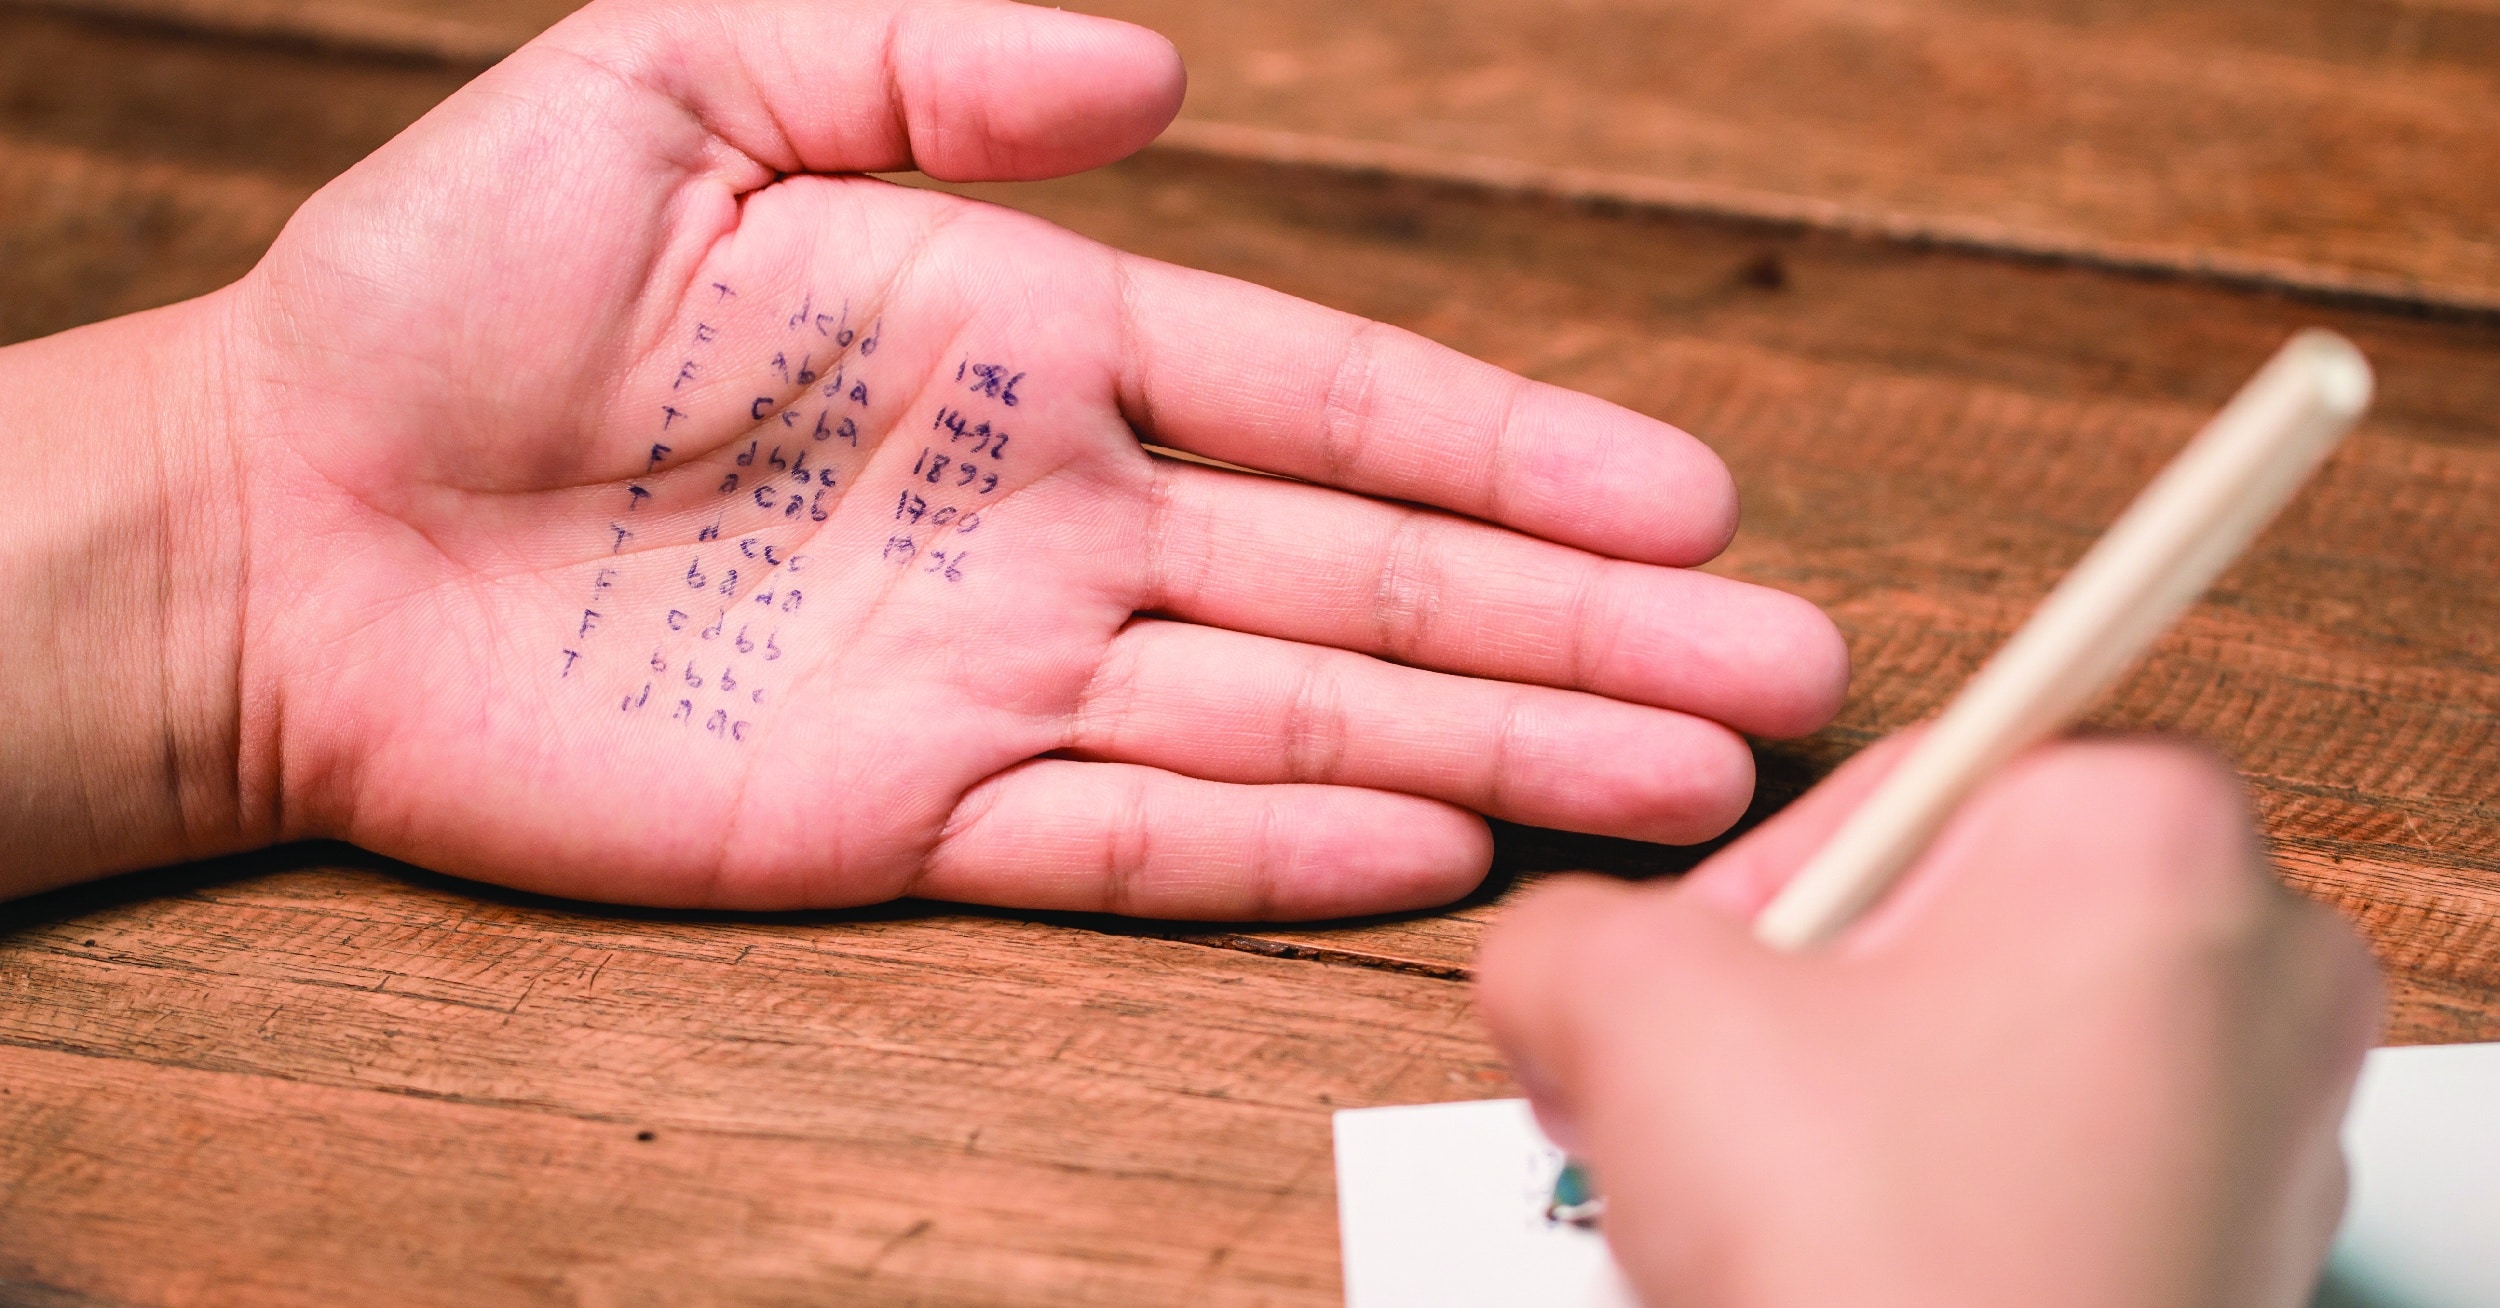 Person using a cheat sheet they wrote on their hand.